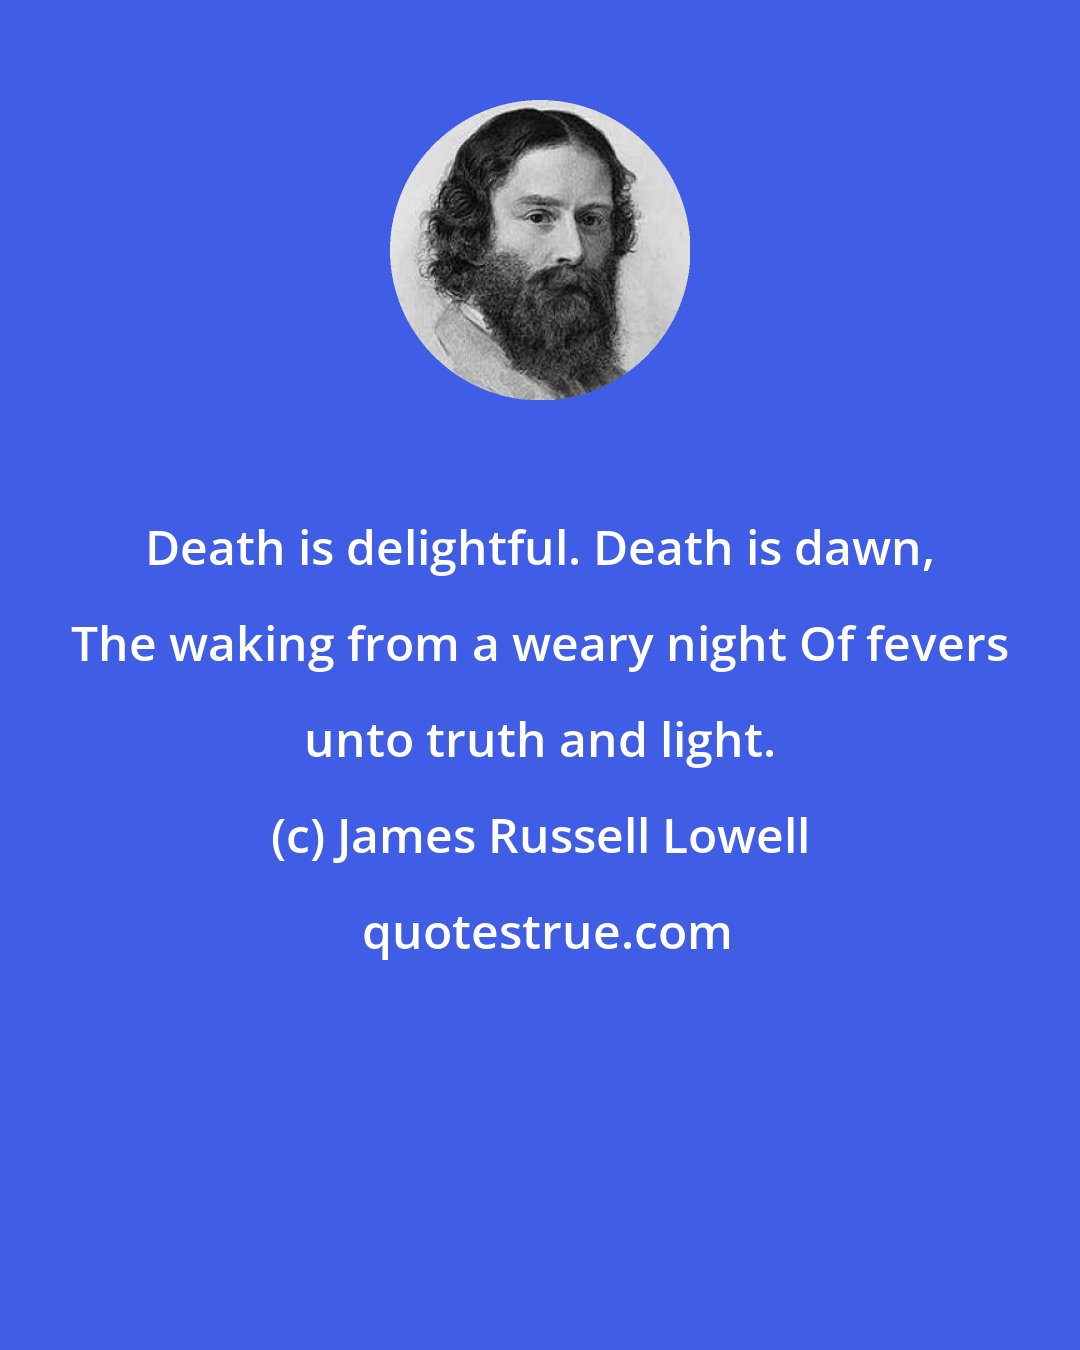 James Russell Lowell: Death is delightful. Death is dawn, The waking from a weary night Of fevers unto truth and light.